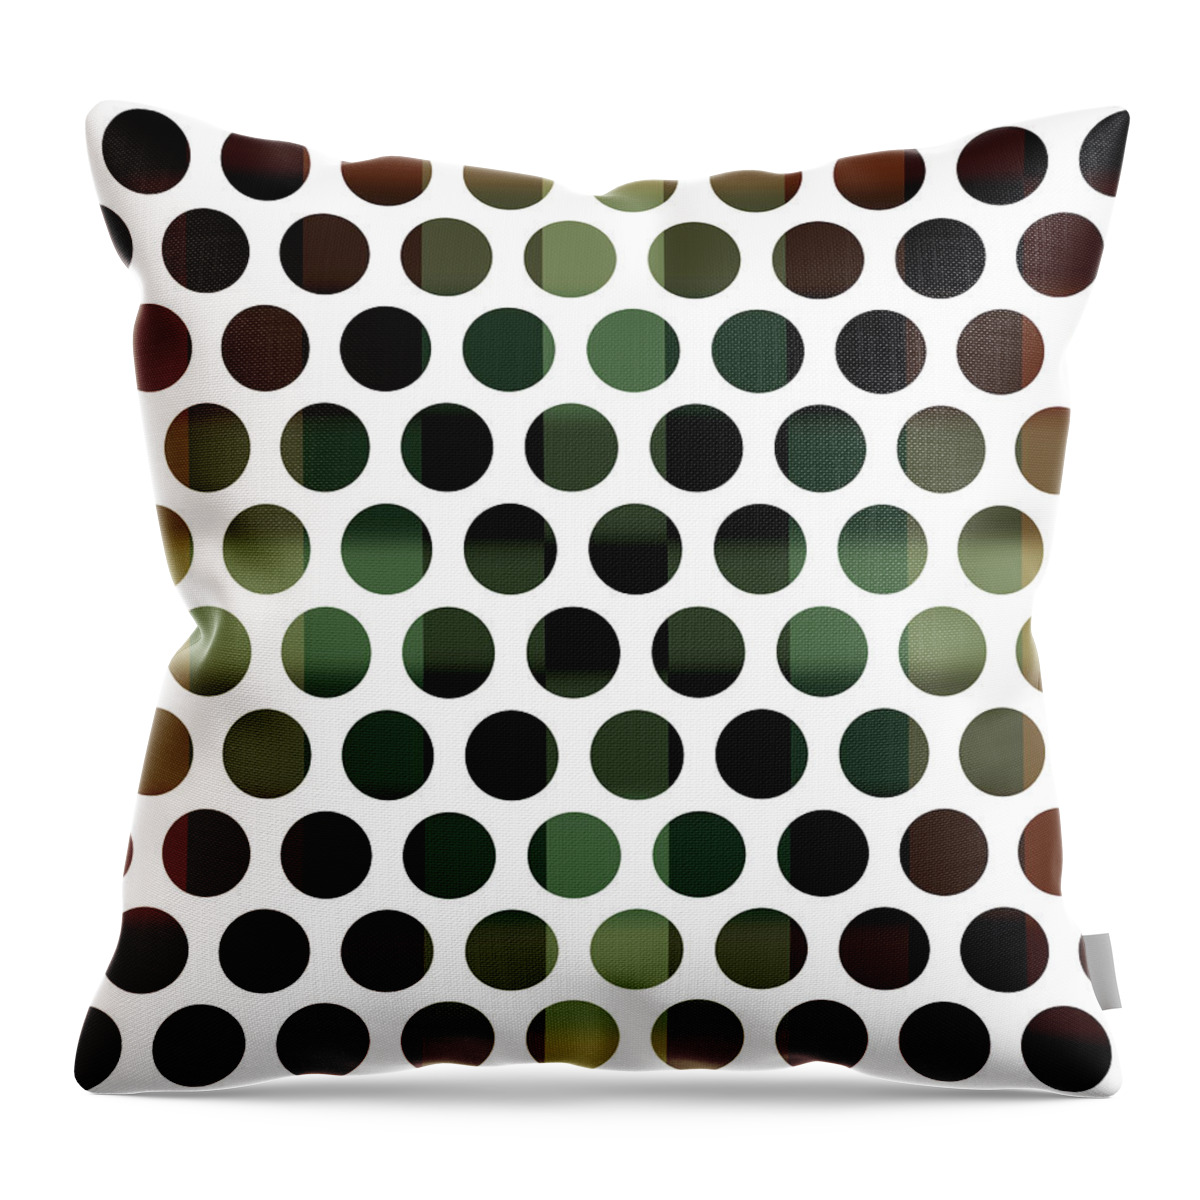 Pattern Throw Pillow featuring the mixed media Colorful Dots Pattern - Polka Dots - Pattern Design 5 - Brown, Slate, Grey, Beige, Steel by Studio Grafiikka